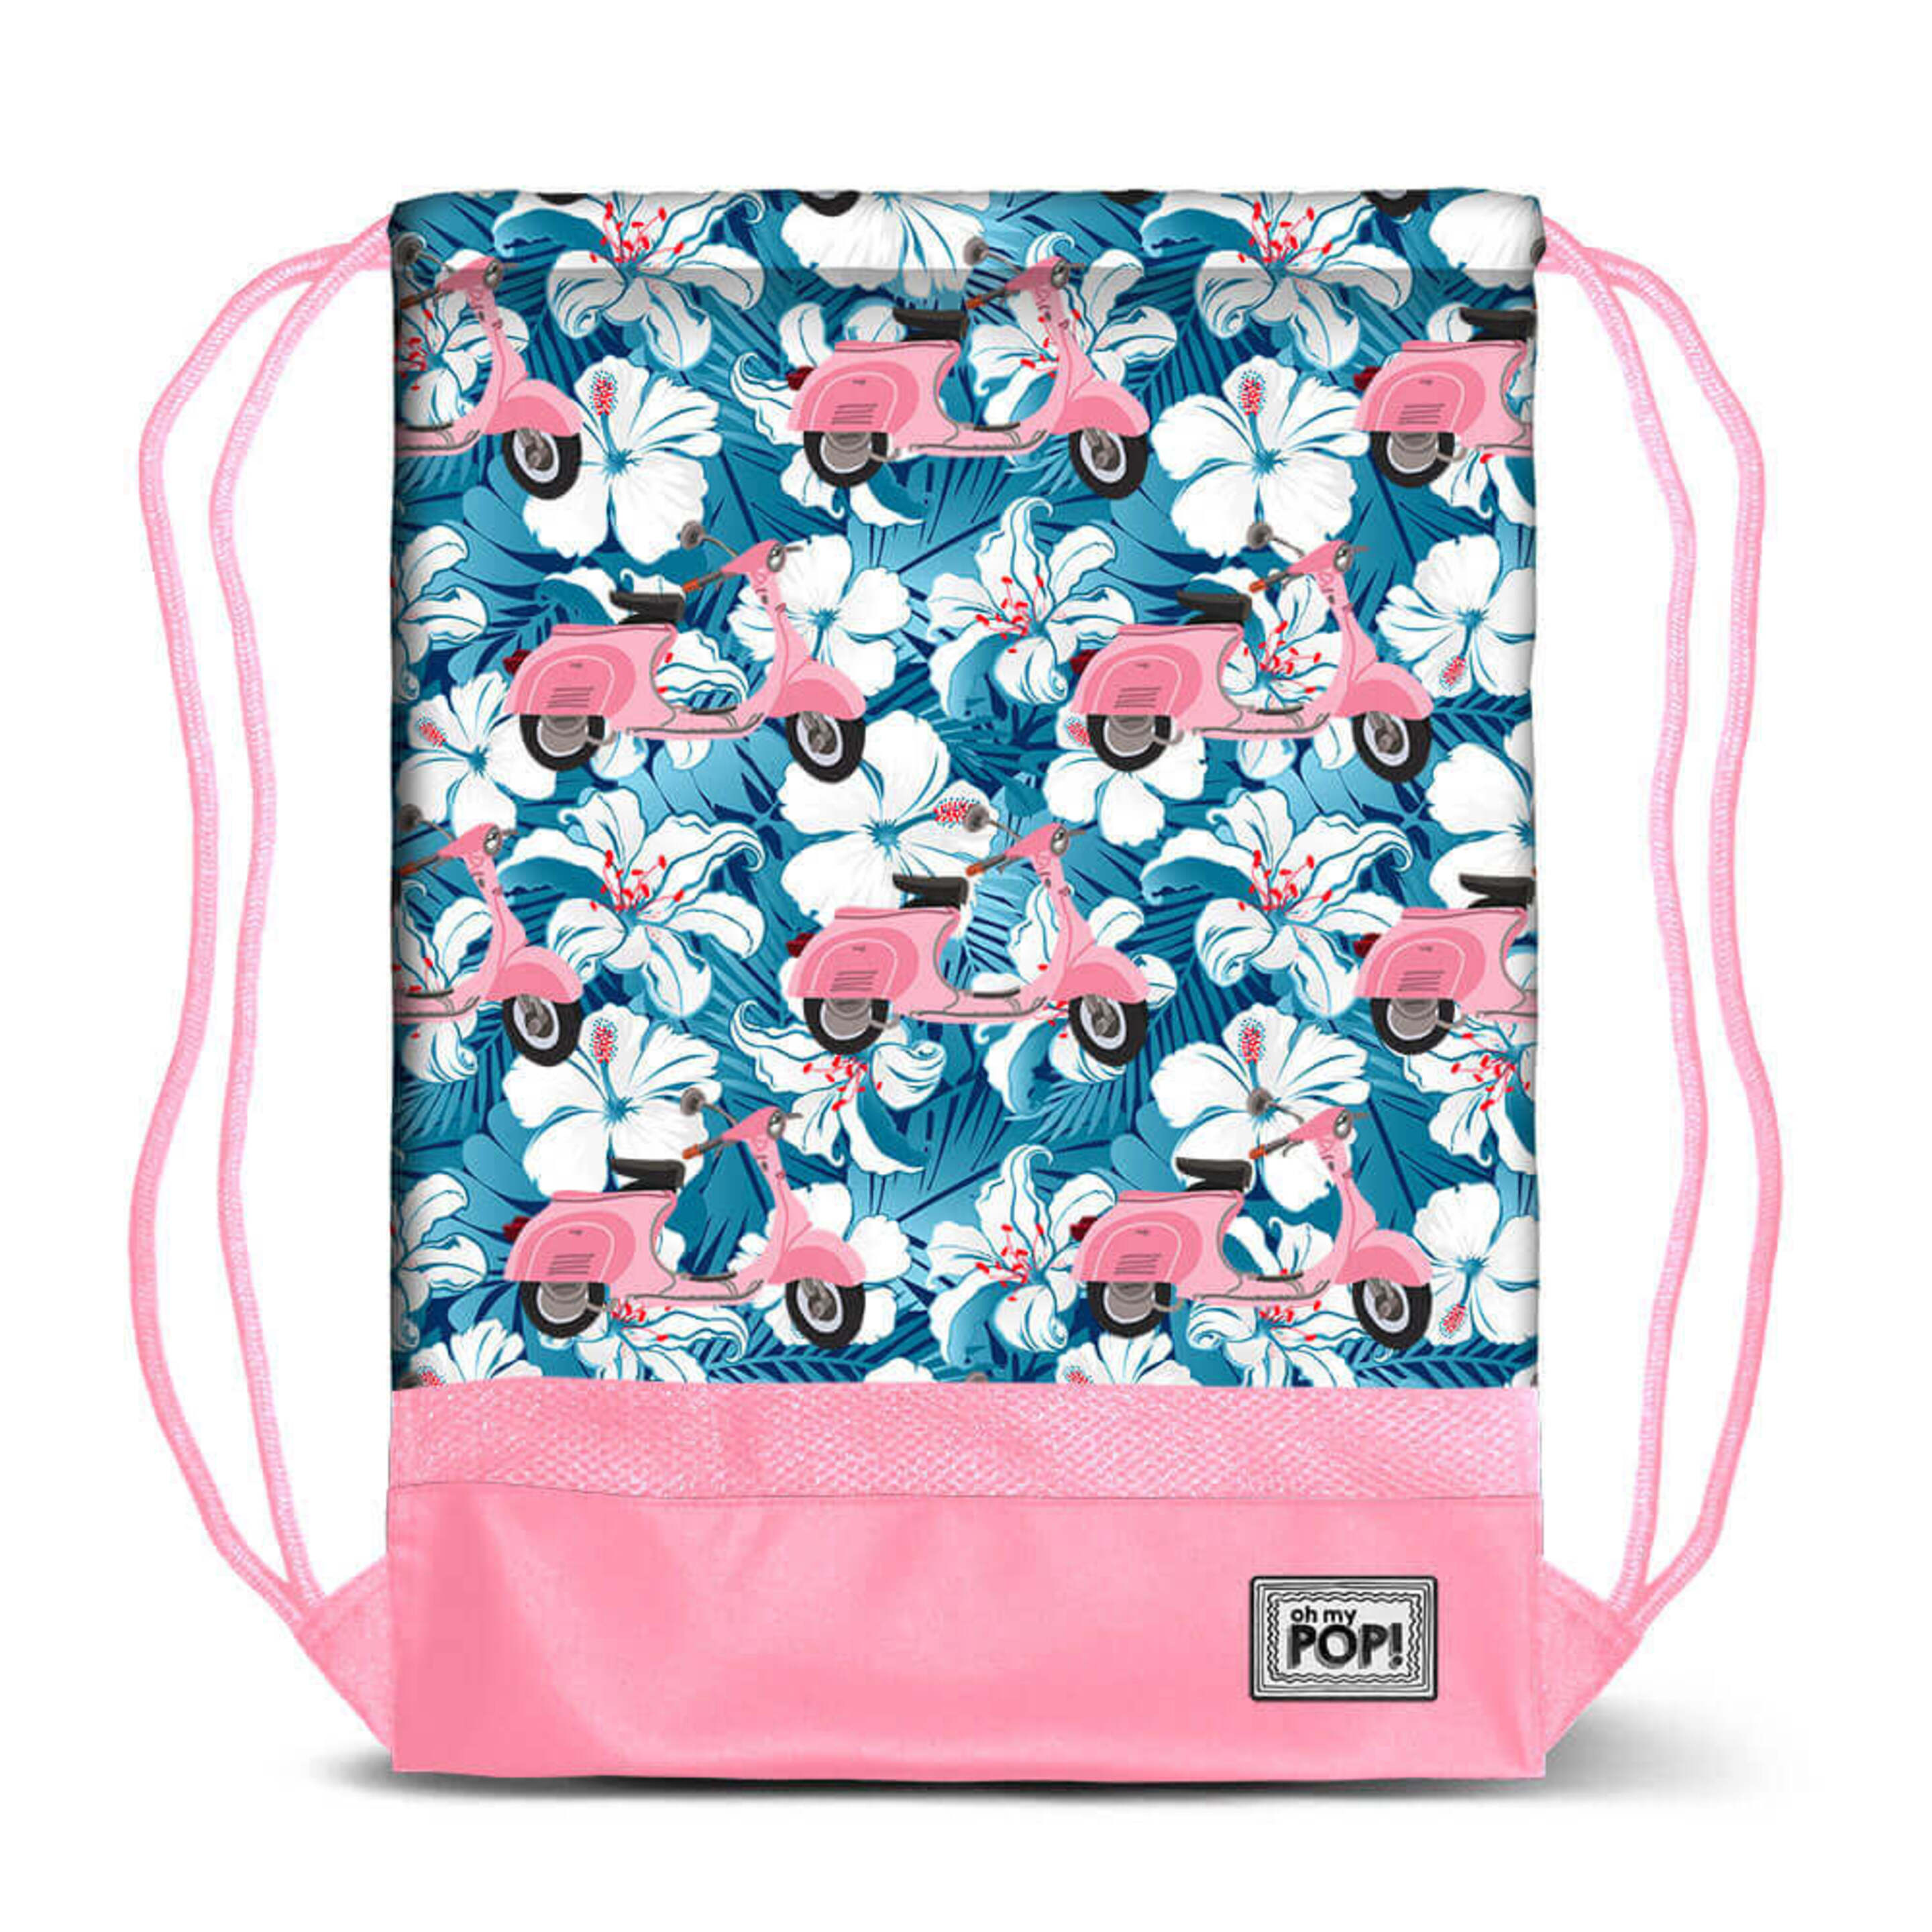 Gymsack Oh My Pop! Pink Scooter - multicolor - 